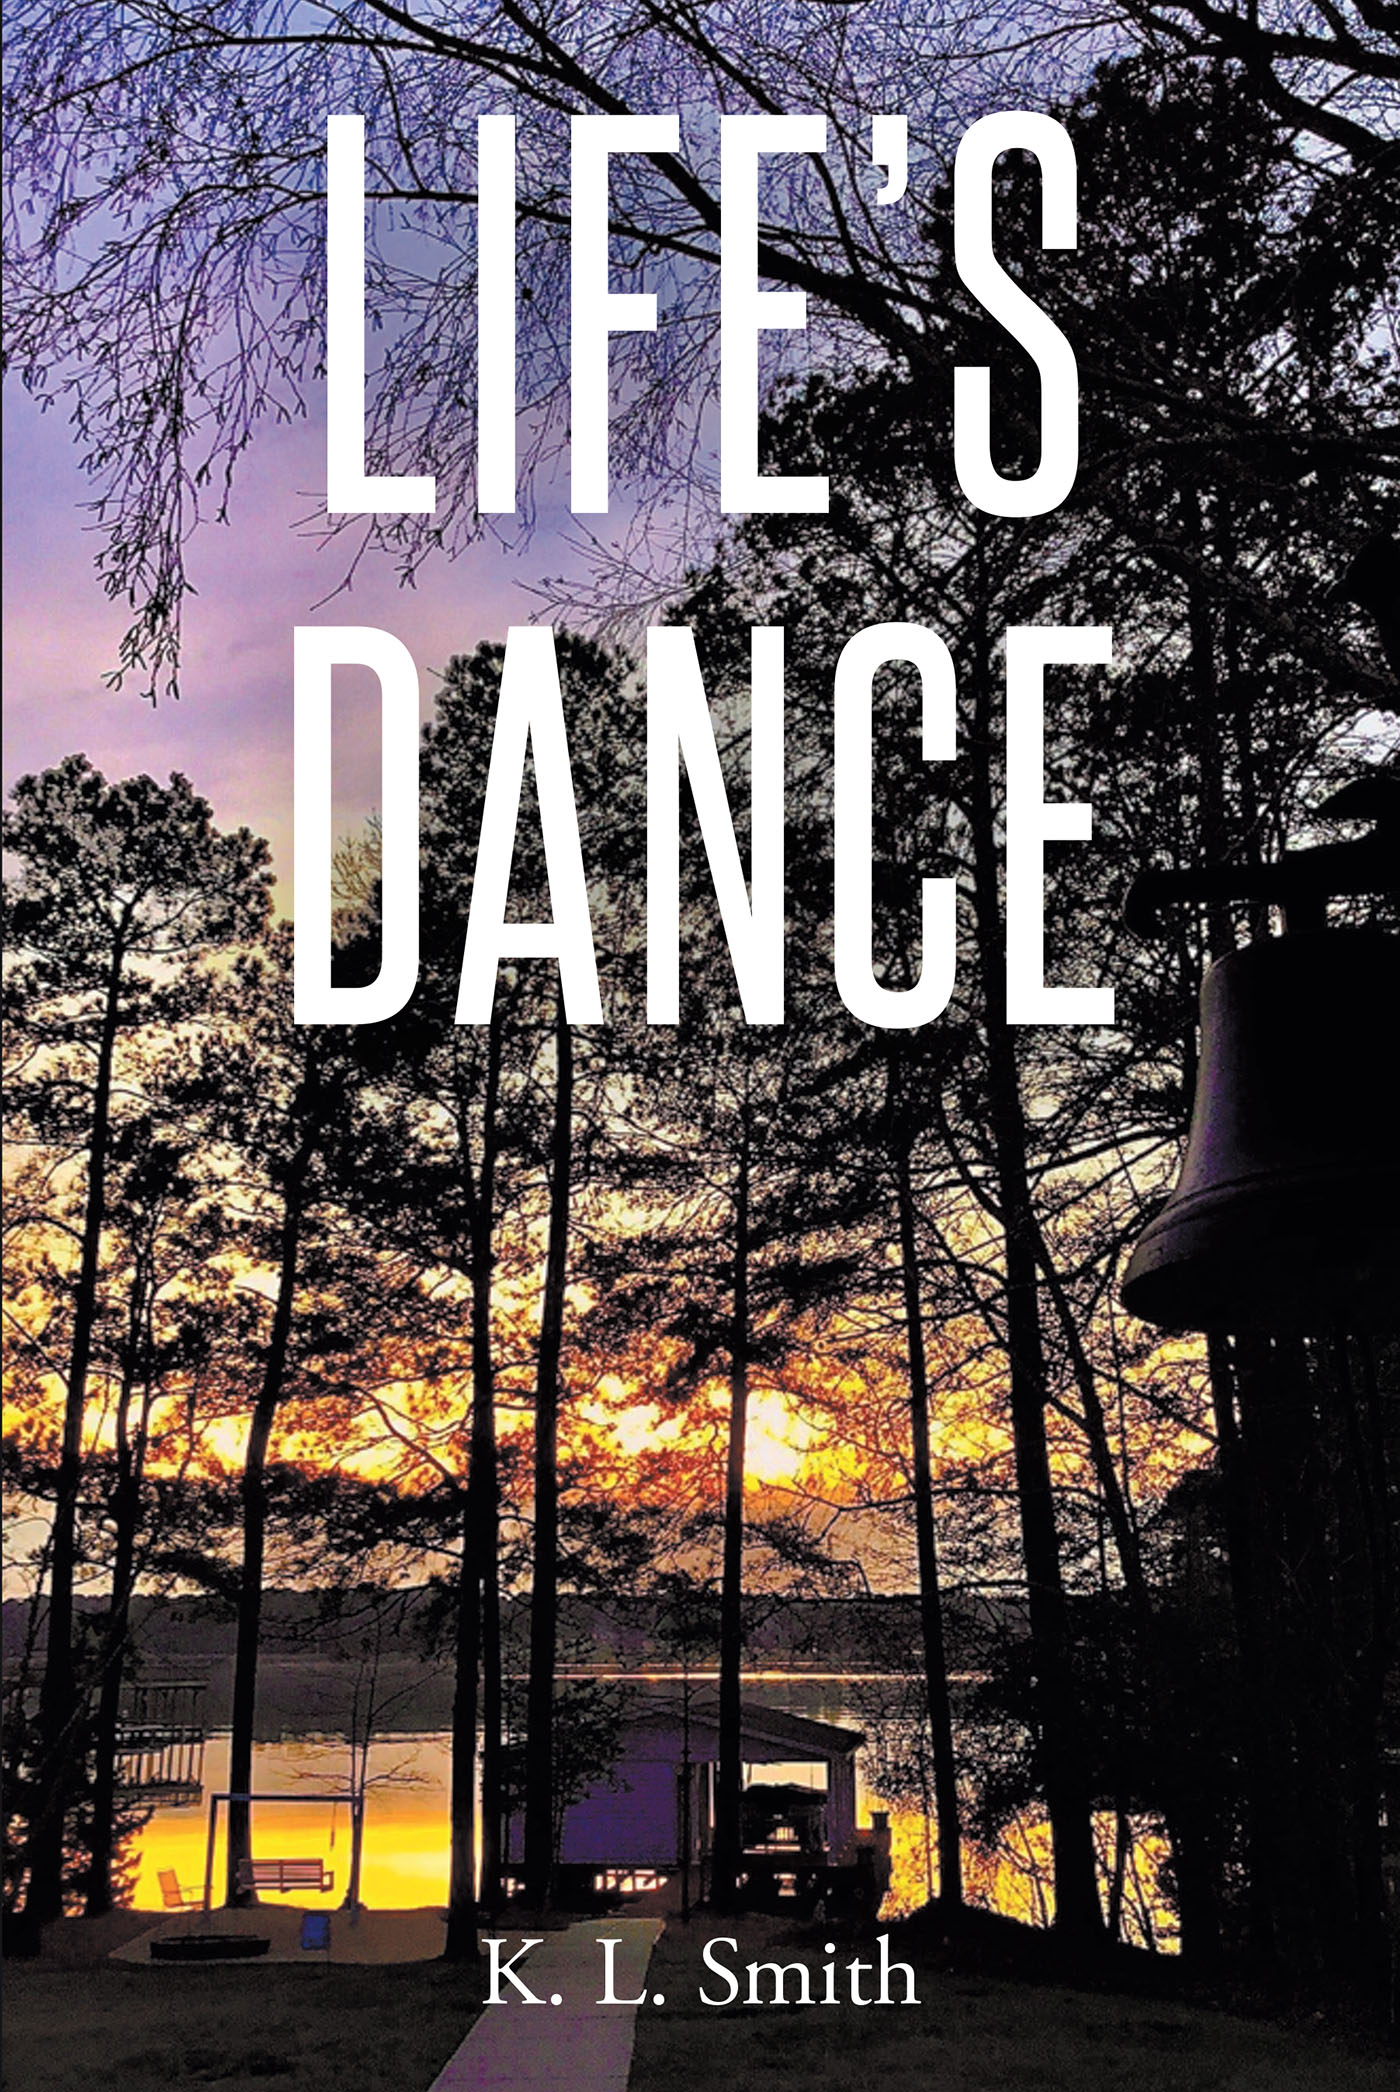 Author K. L. Smith’s Newly Released "Life's Dance" is a Touching Series of Stories the Author Experienced That Formed the Course of Her Journey and Outlook on Life